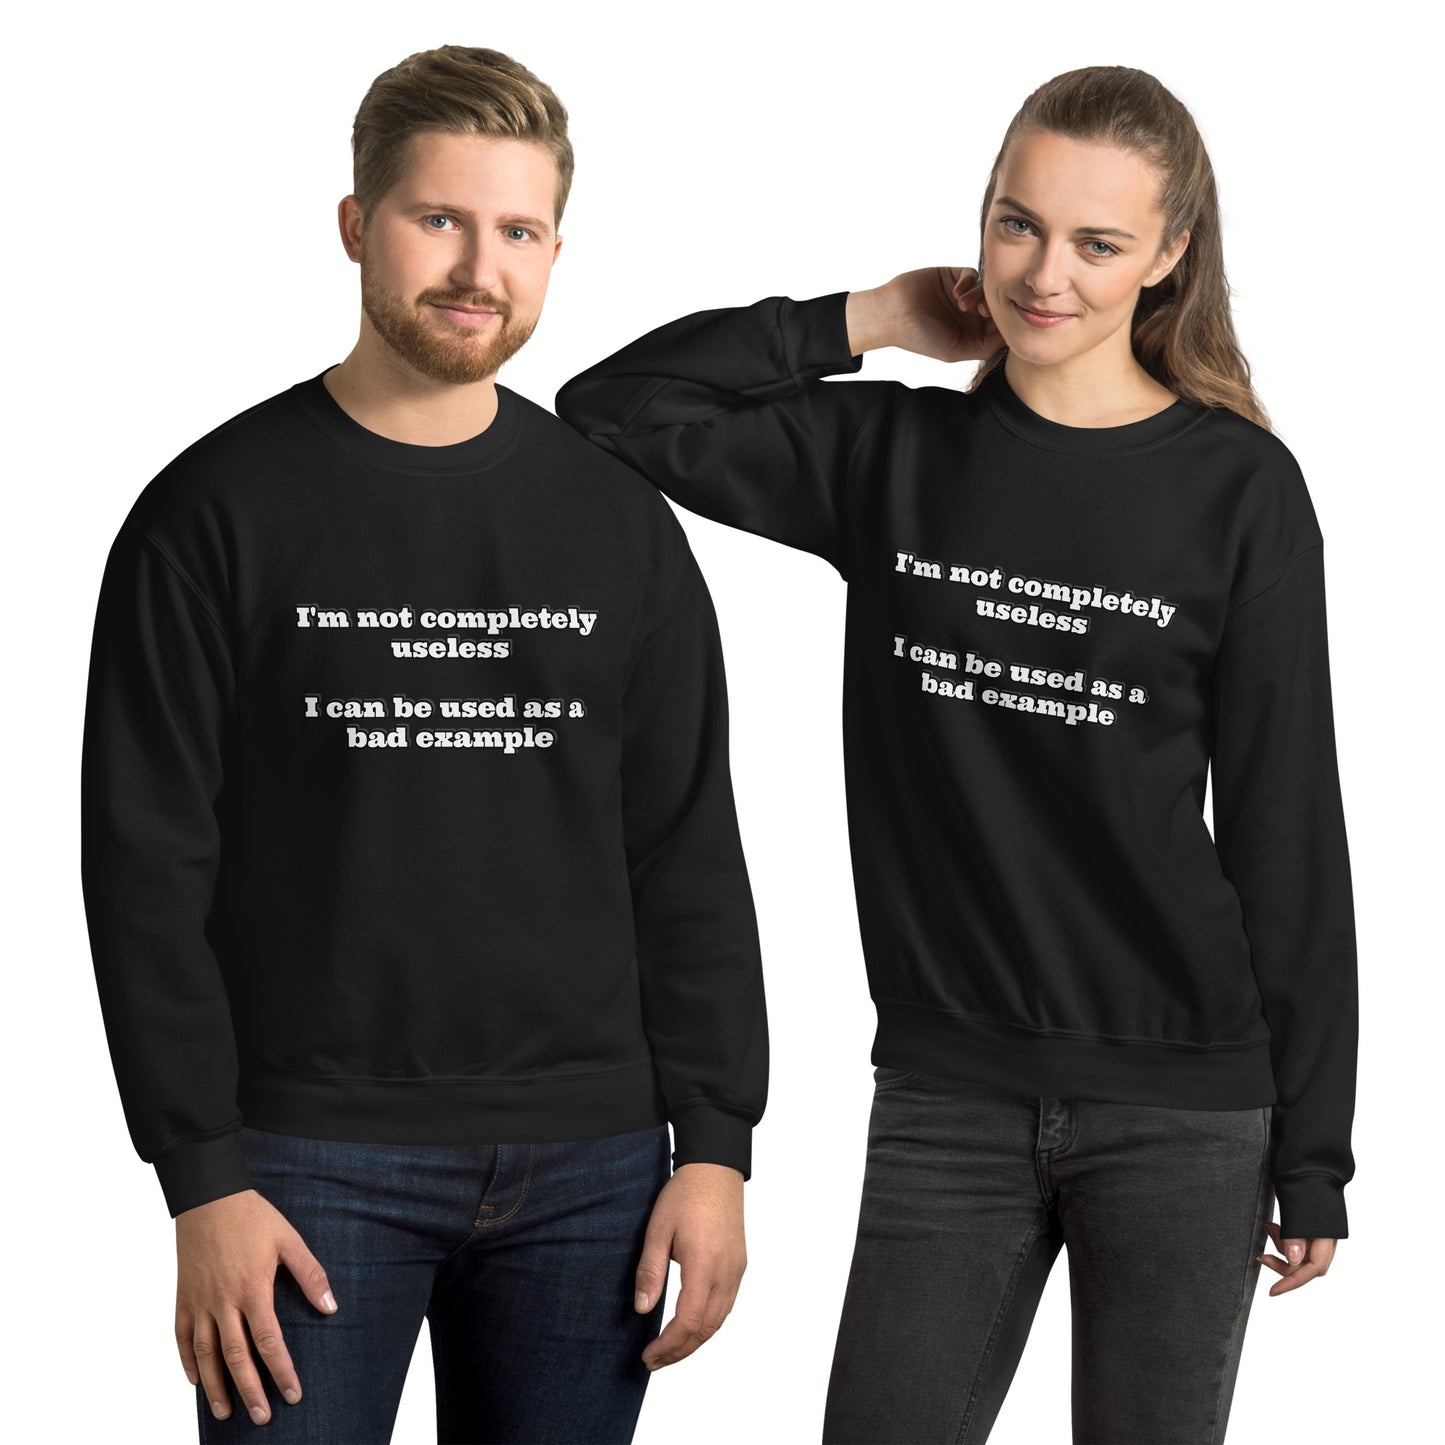 Man and women with black sweatshirt with text “I'm not completely useless I can be used as a bad example”